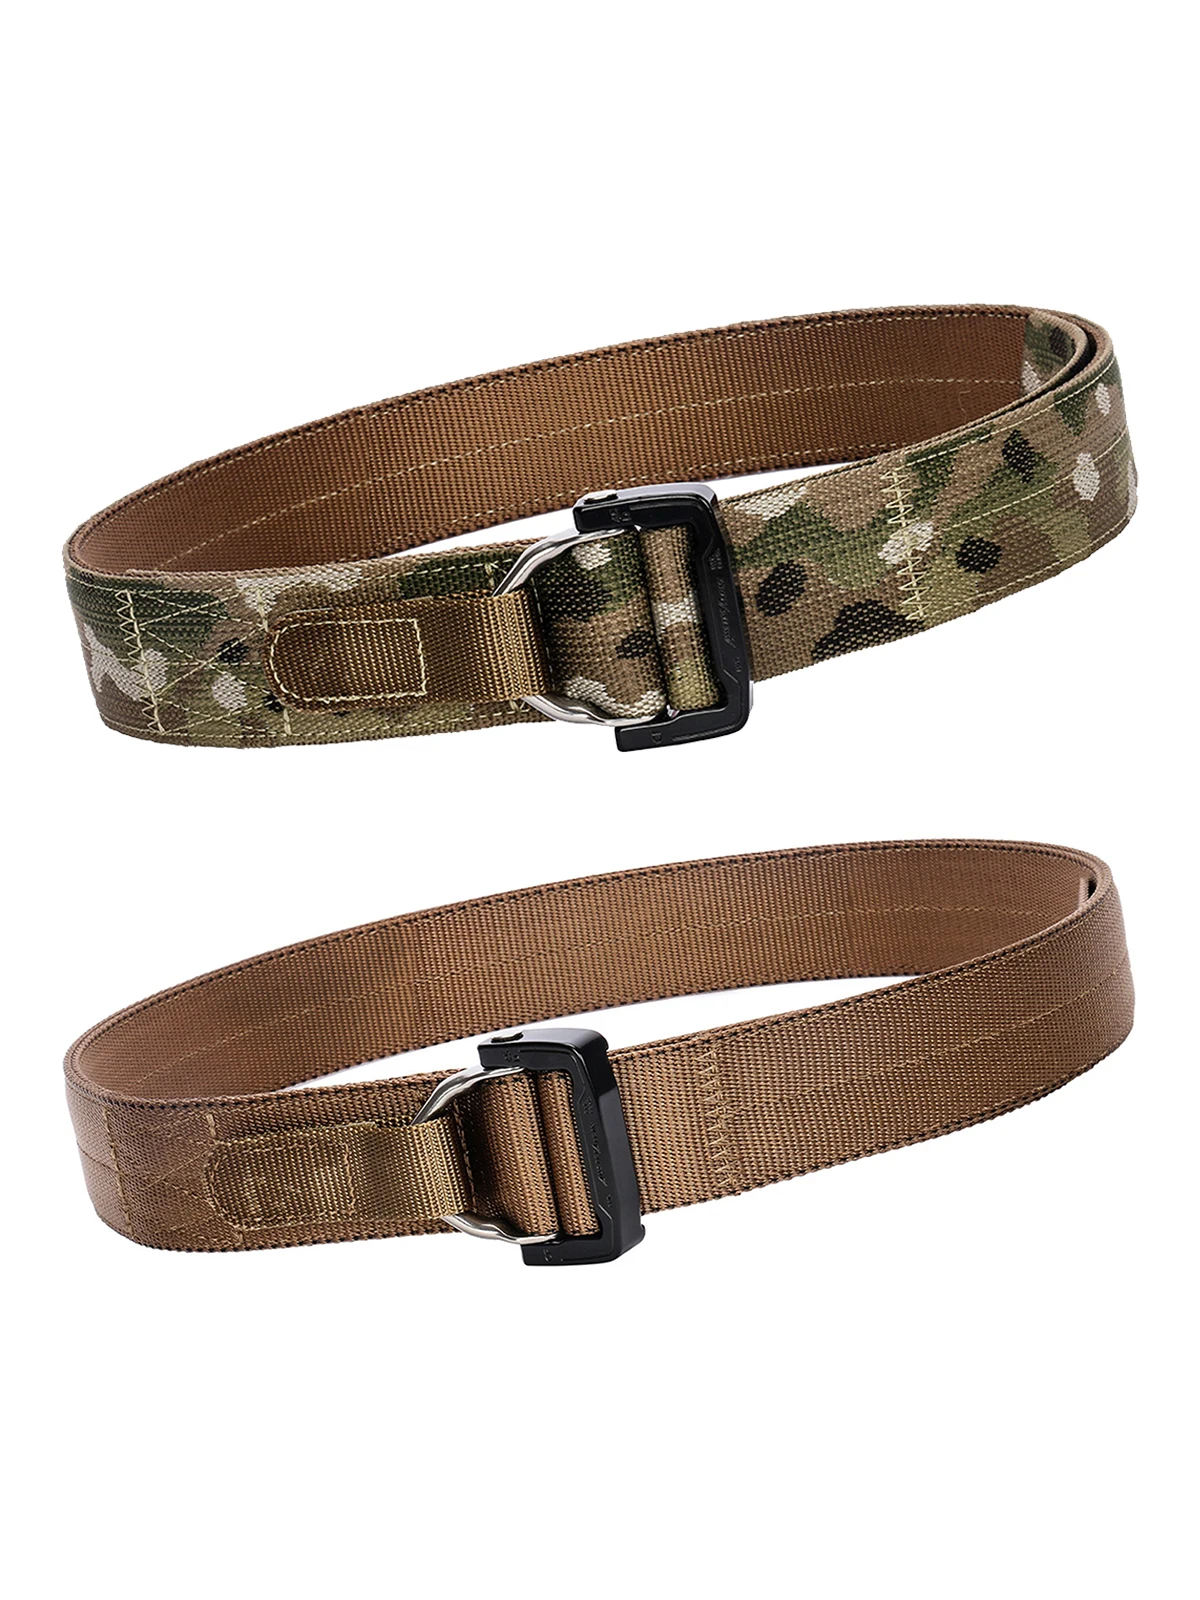 MAUHOSO Tactical Gun Belt with Heavy Duty for Men and Women D-ring 1.75" 2-Ply